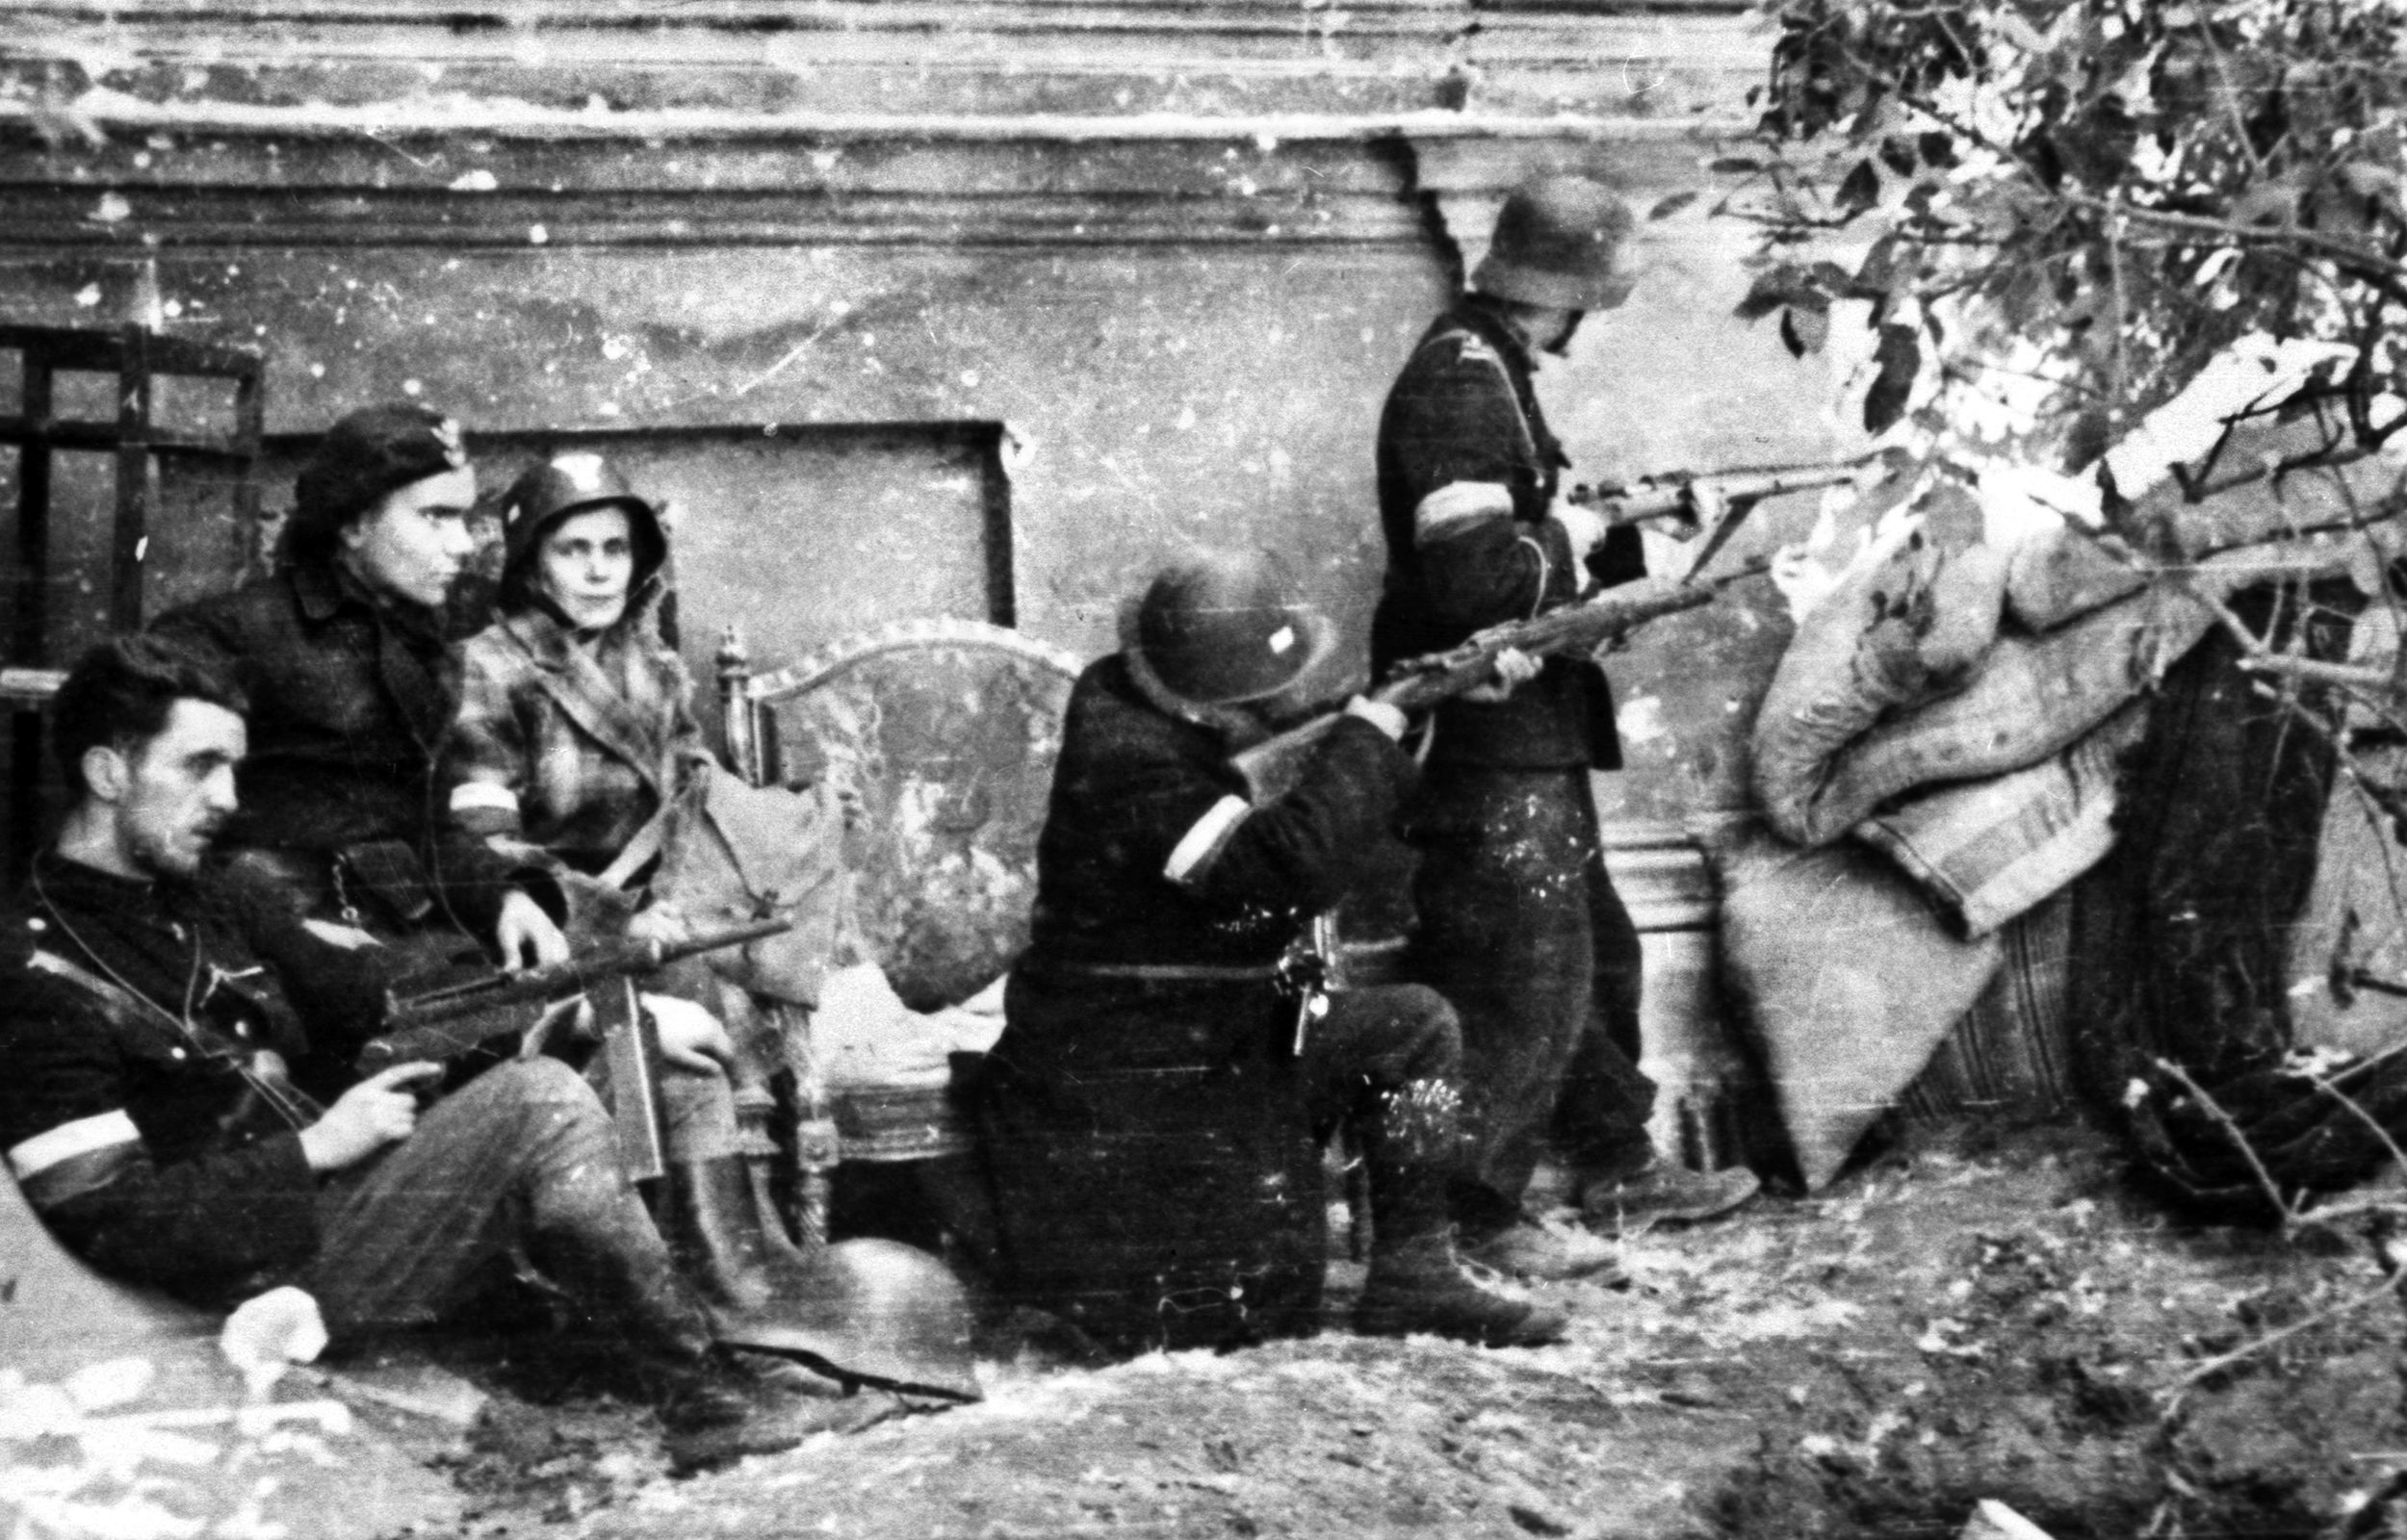 Four men and a woman of Warsaw’s Milosz Battalion man an improvised barricade against a German assault. Wearing a mixture of Polish and German uniforms, the fighters are also wearing red-and-white armbands—the colors of the Polish flag.